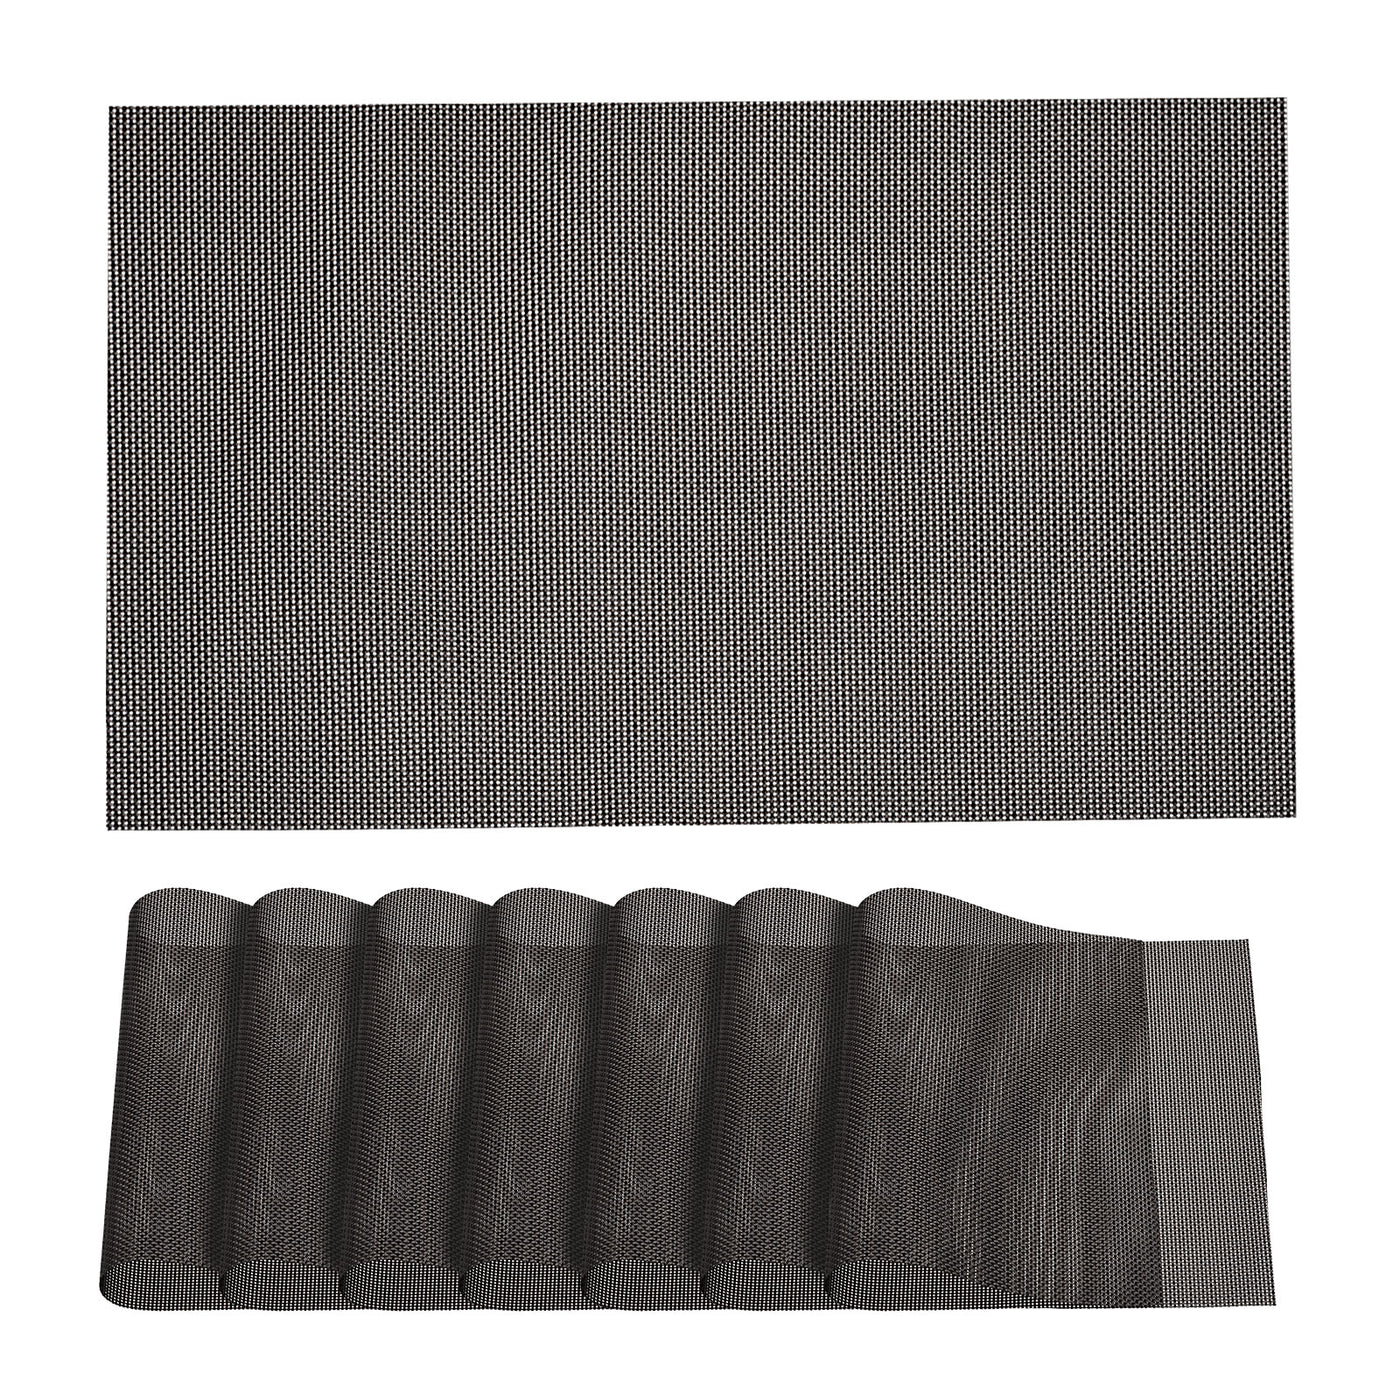 uxcell Uxcell Place Mats, 450x300mm Table Mats Set of 8 PVC Washable Woven Placemat Brown